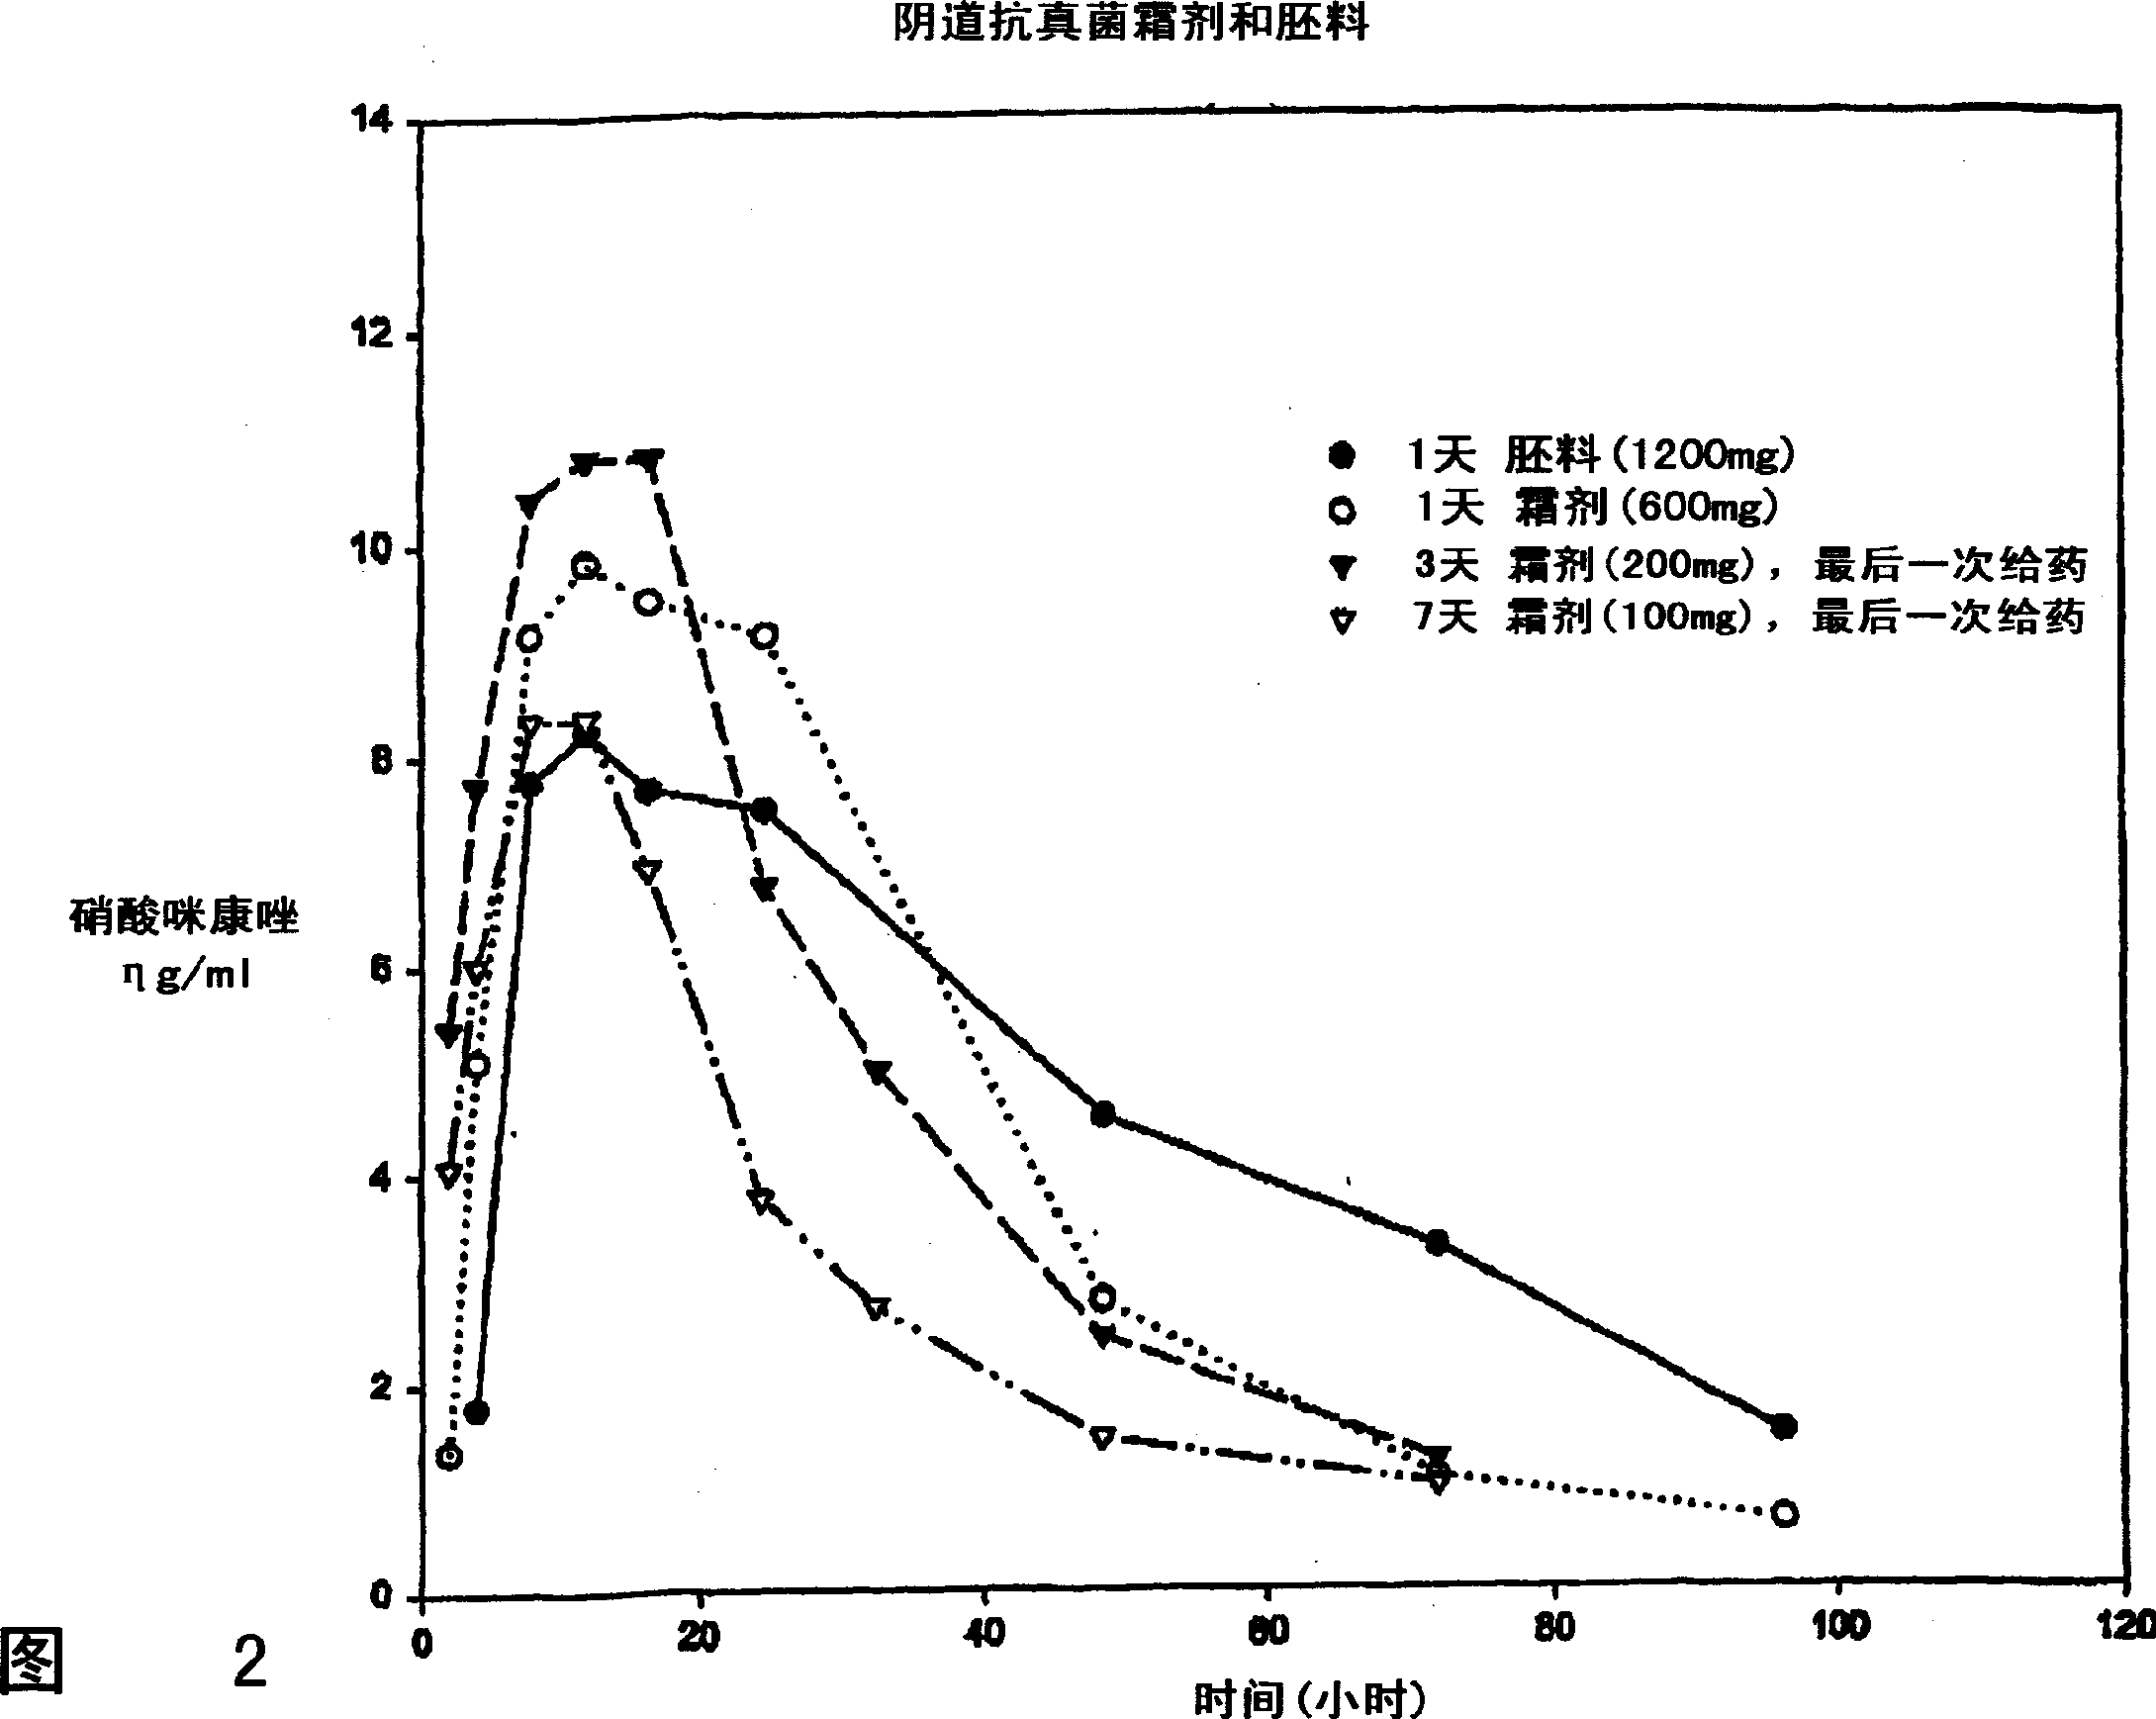 Compositions and methods for delivering antibacterial, antifungal and antiviral ointments to the oral, nasal or vaginal cavity